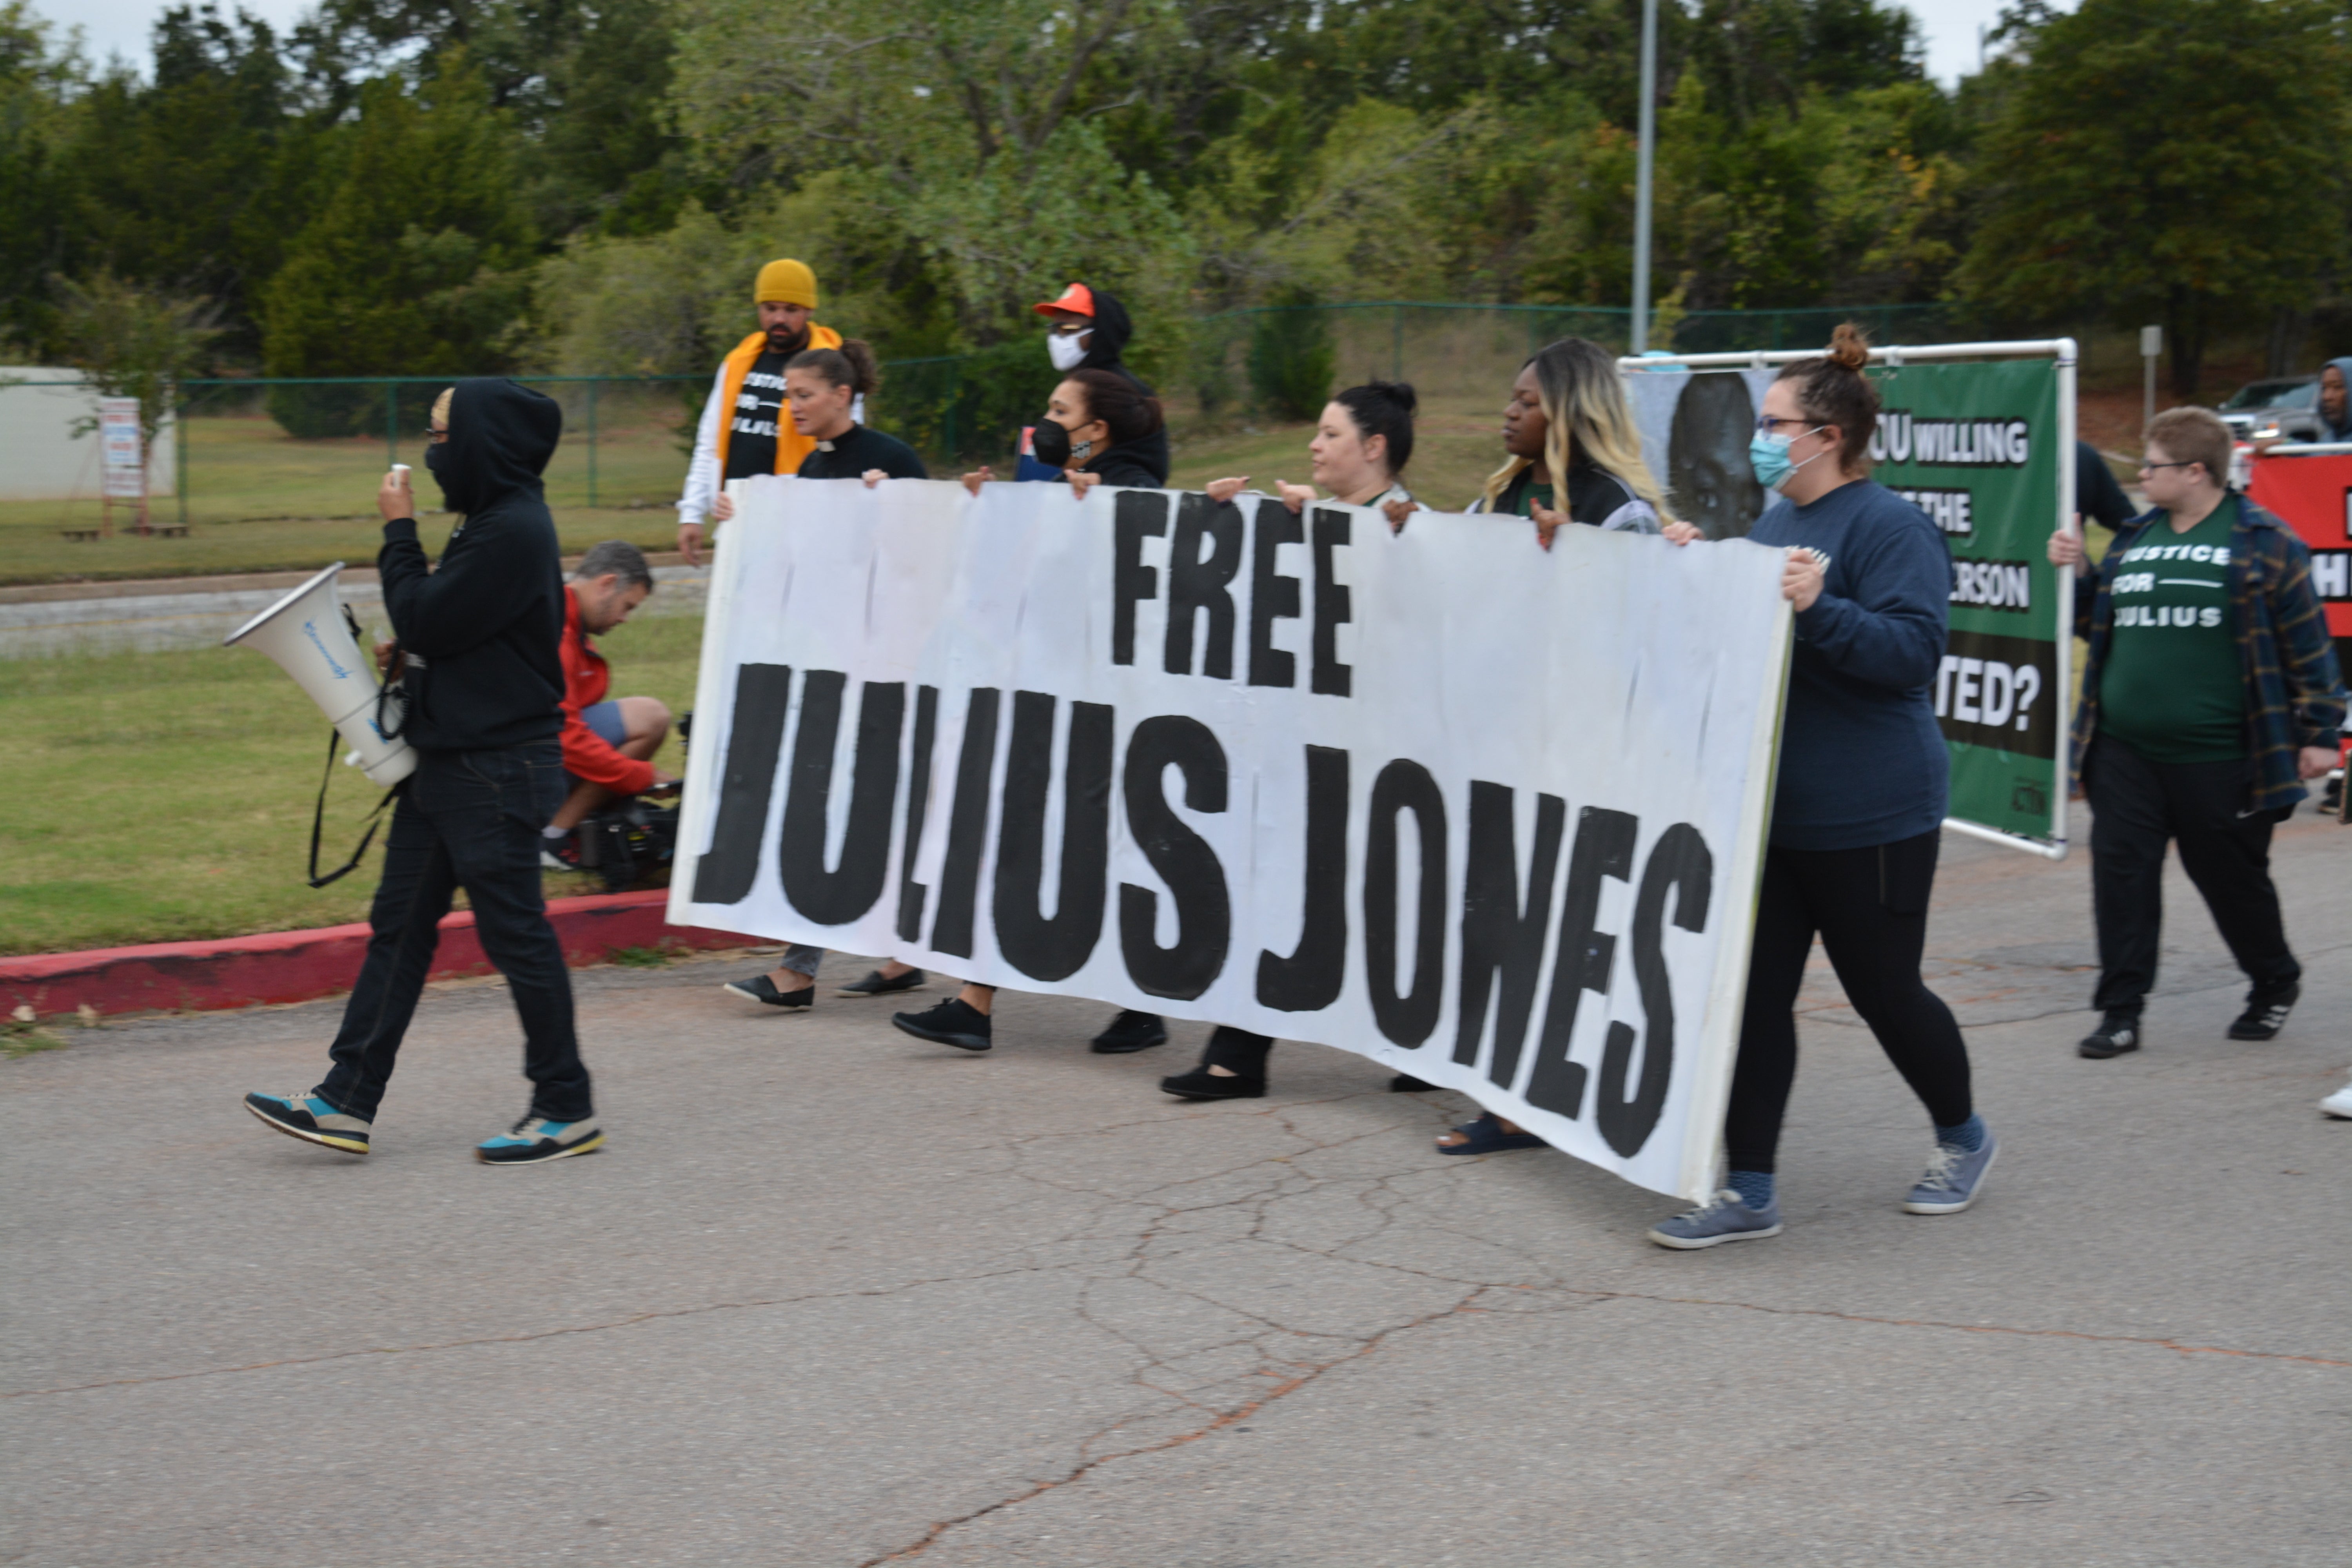 Supporters march for Julius Jones, an Oklahoma death row inmate who has long maintained his innocence, on 26 October, 2021.